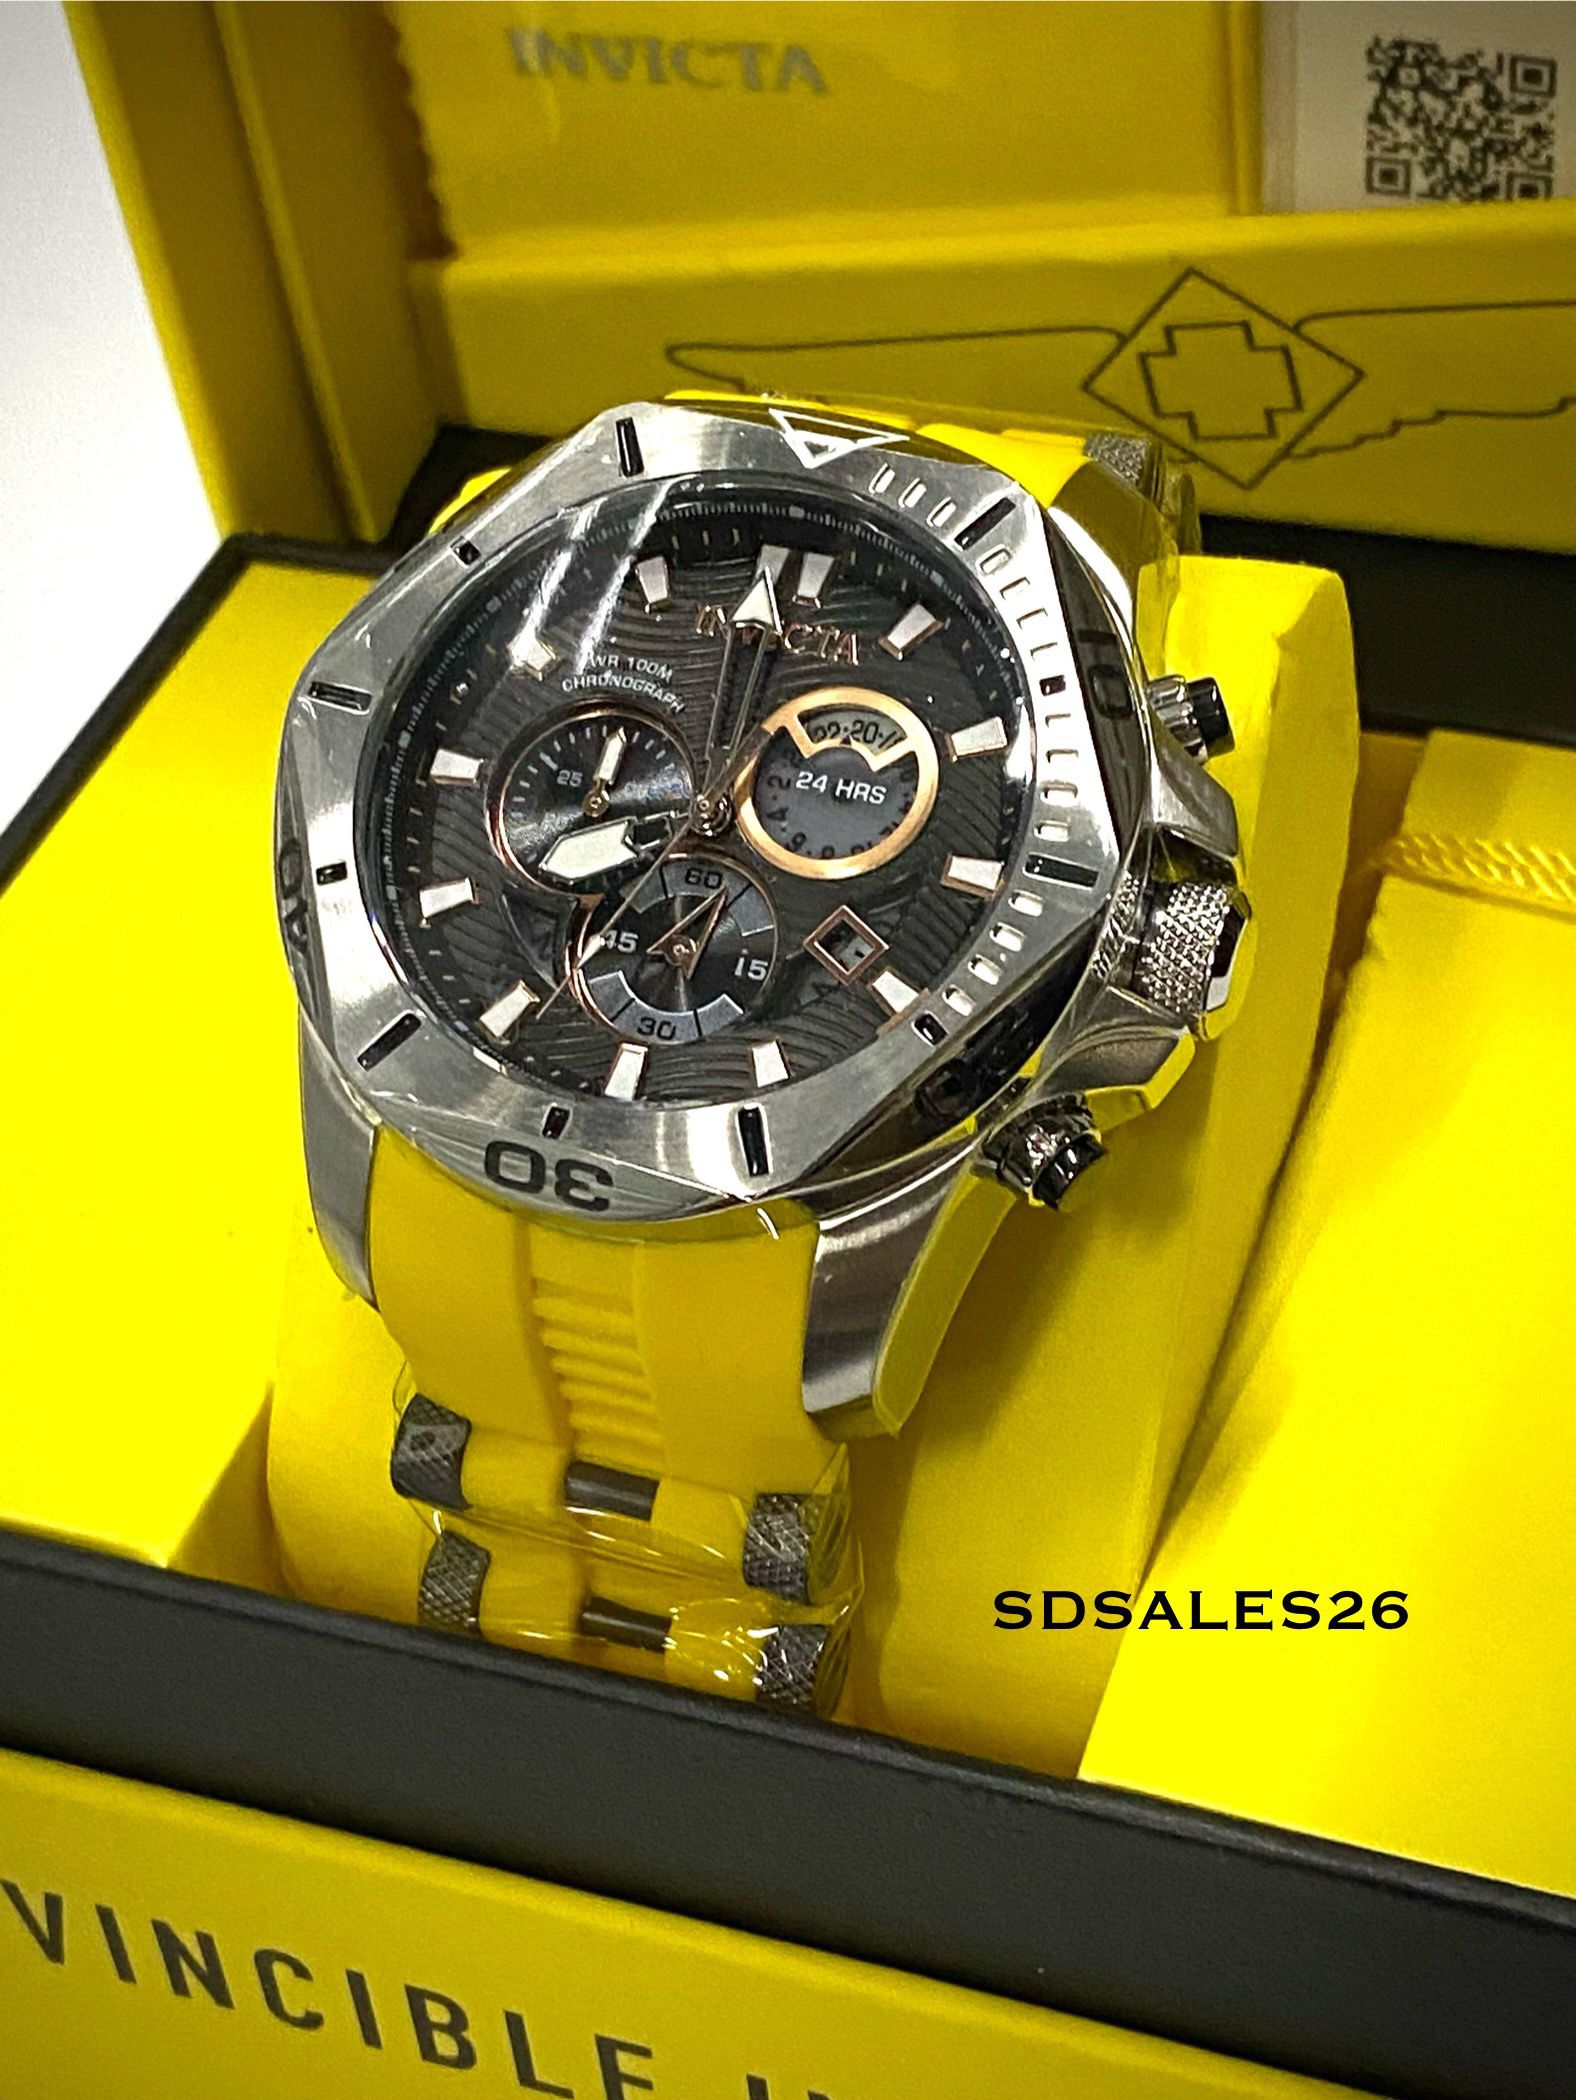 Invicta 32247 Stainless Steel Men’s Watch With Yellow Bands